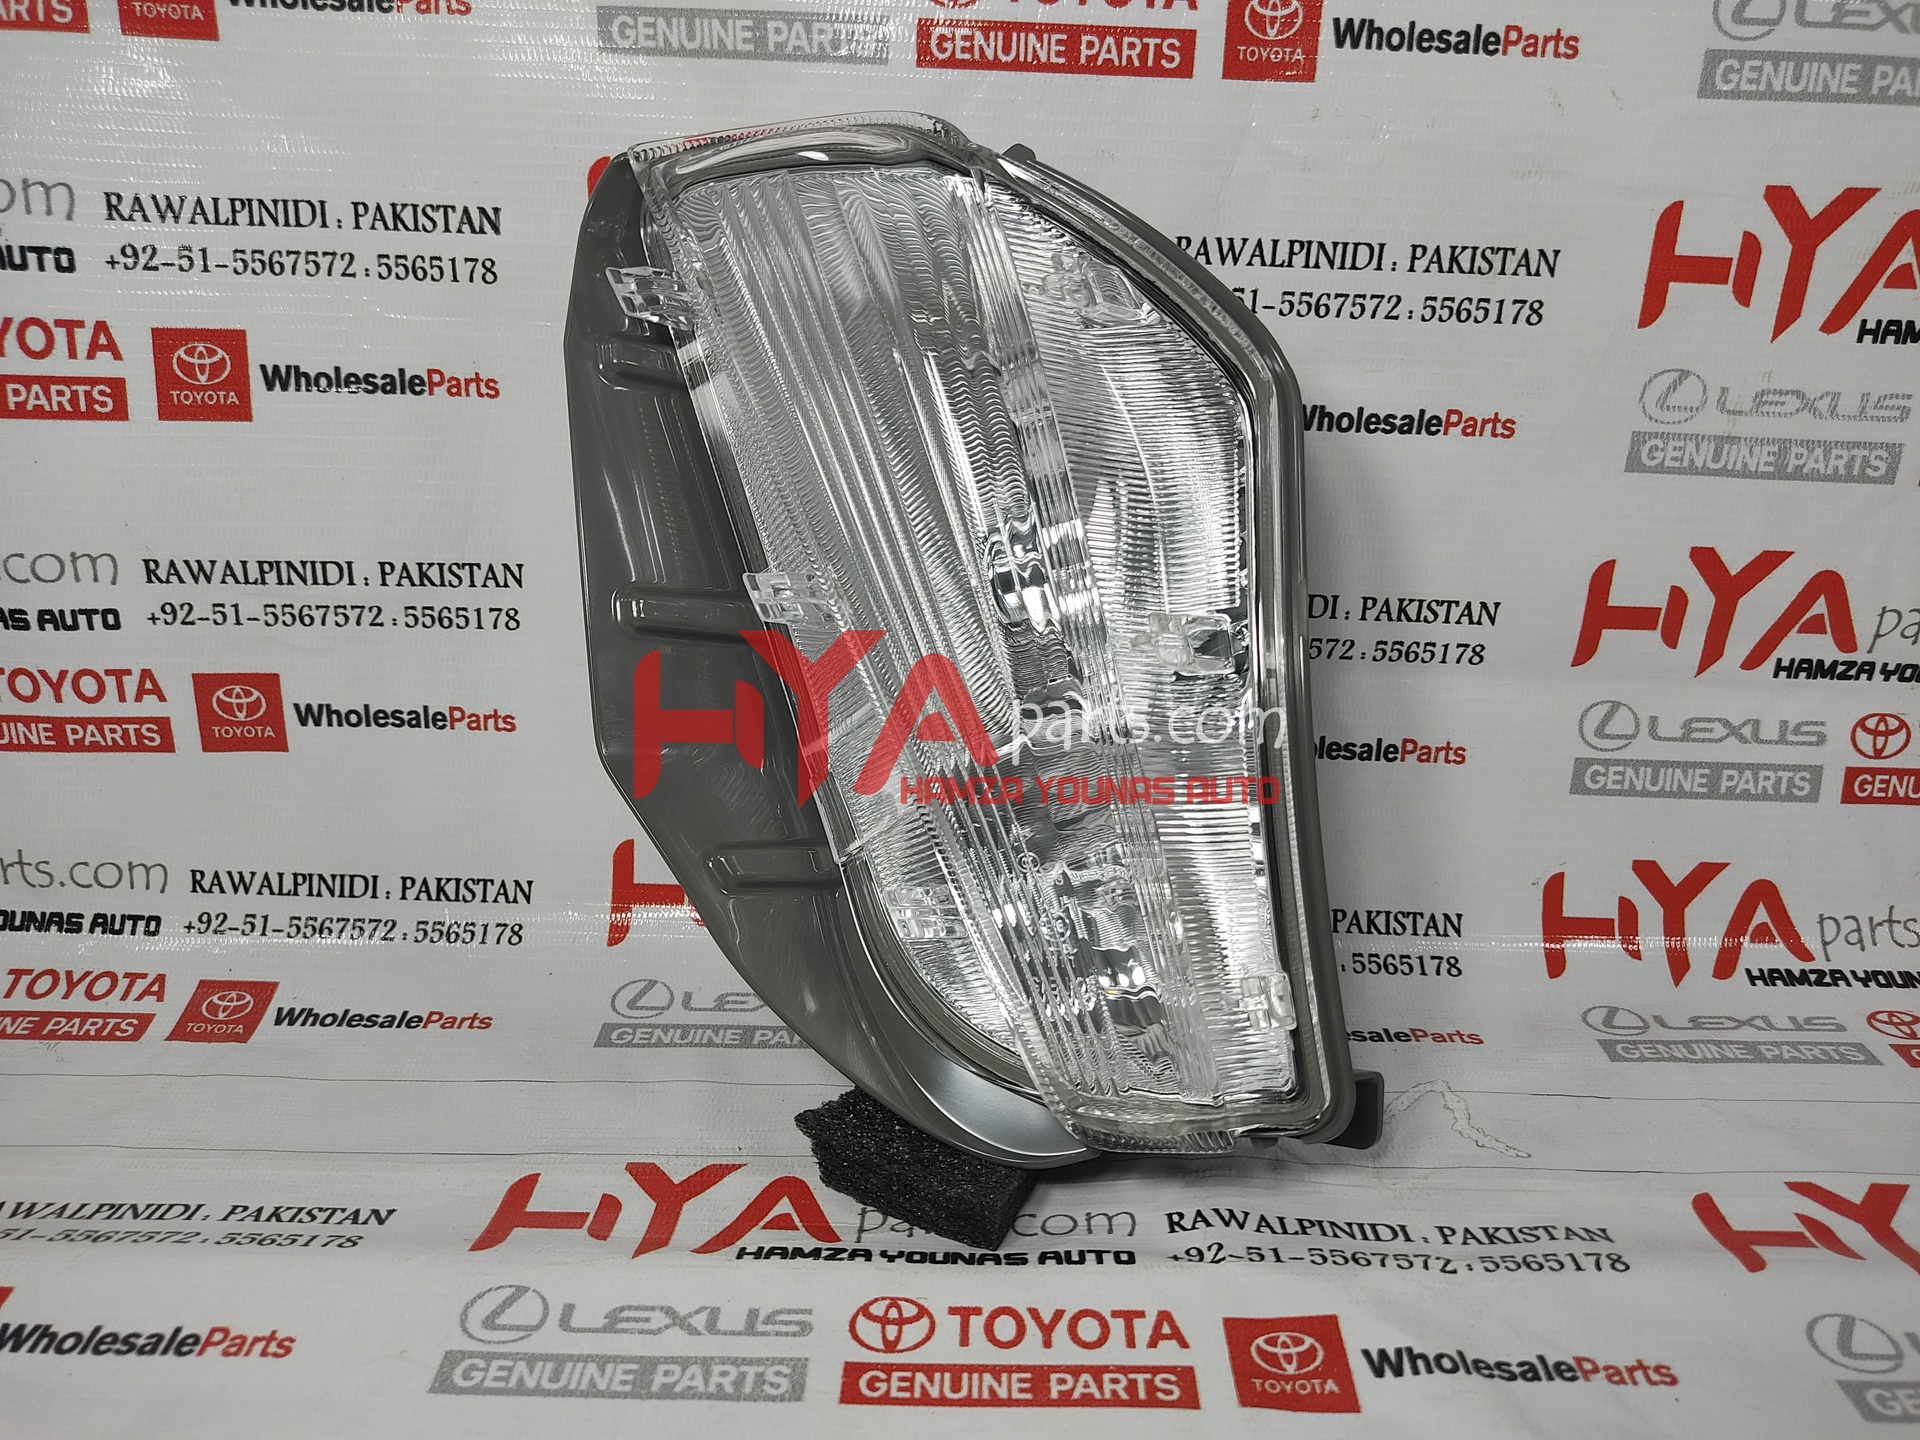 [81521-47030] UNIT ASSY, FRONT TURN SIGNAL LAMP, LH